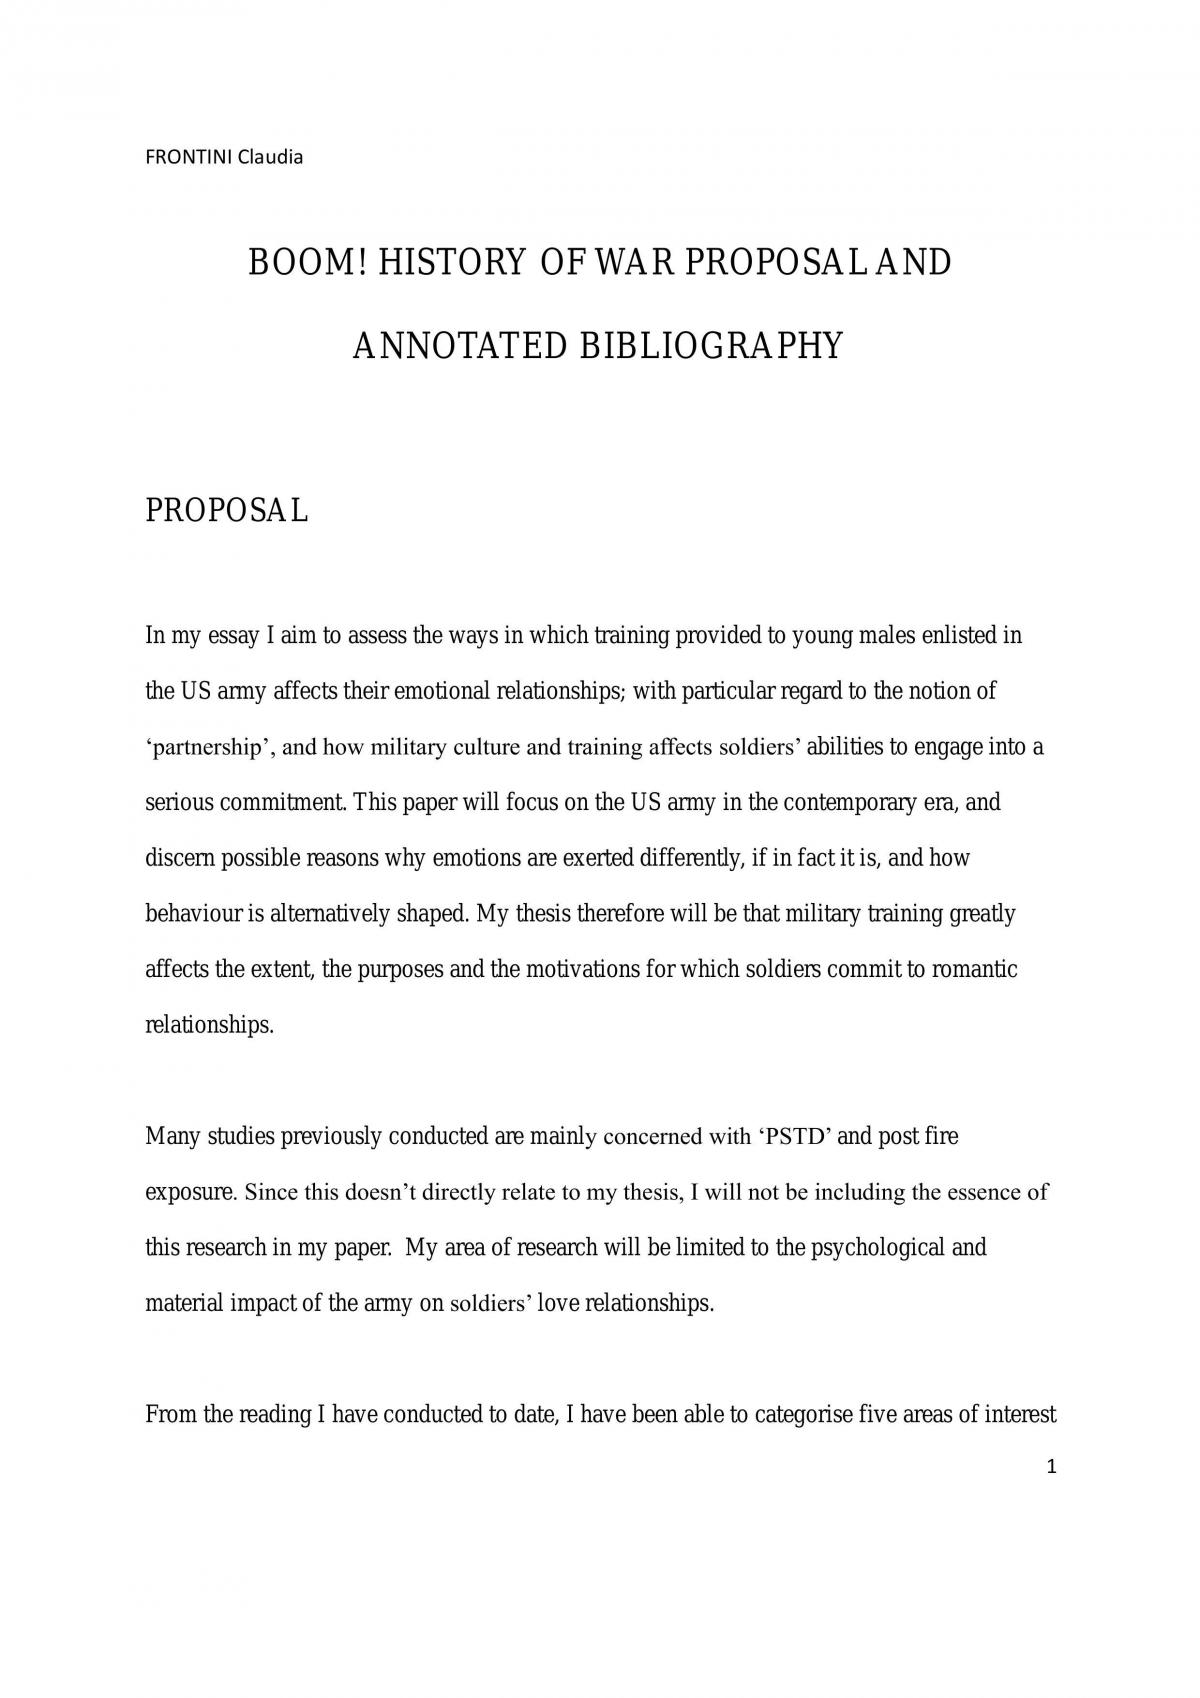 Proposal and annotated bibliography  HSTY21 - BOOM! The History